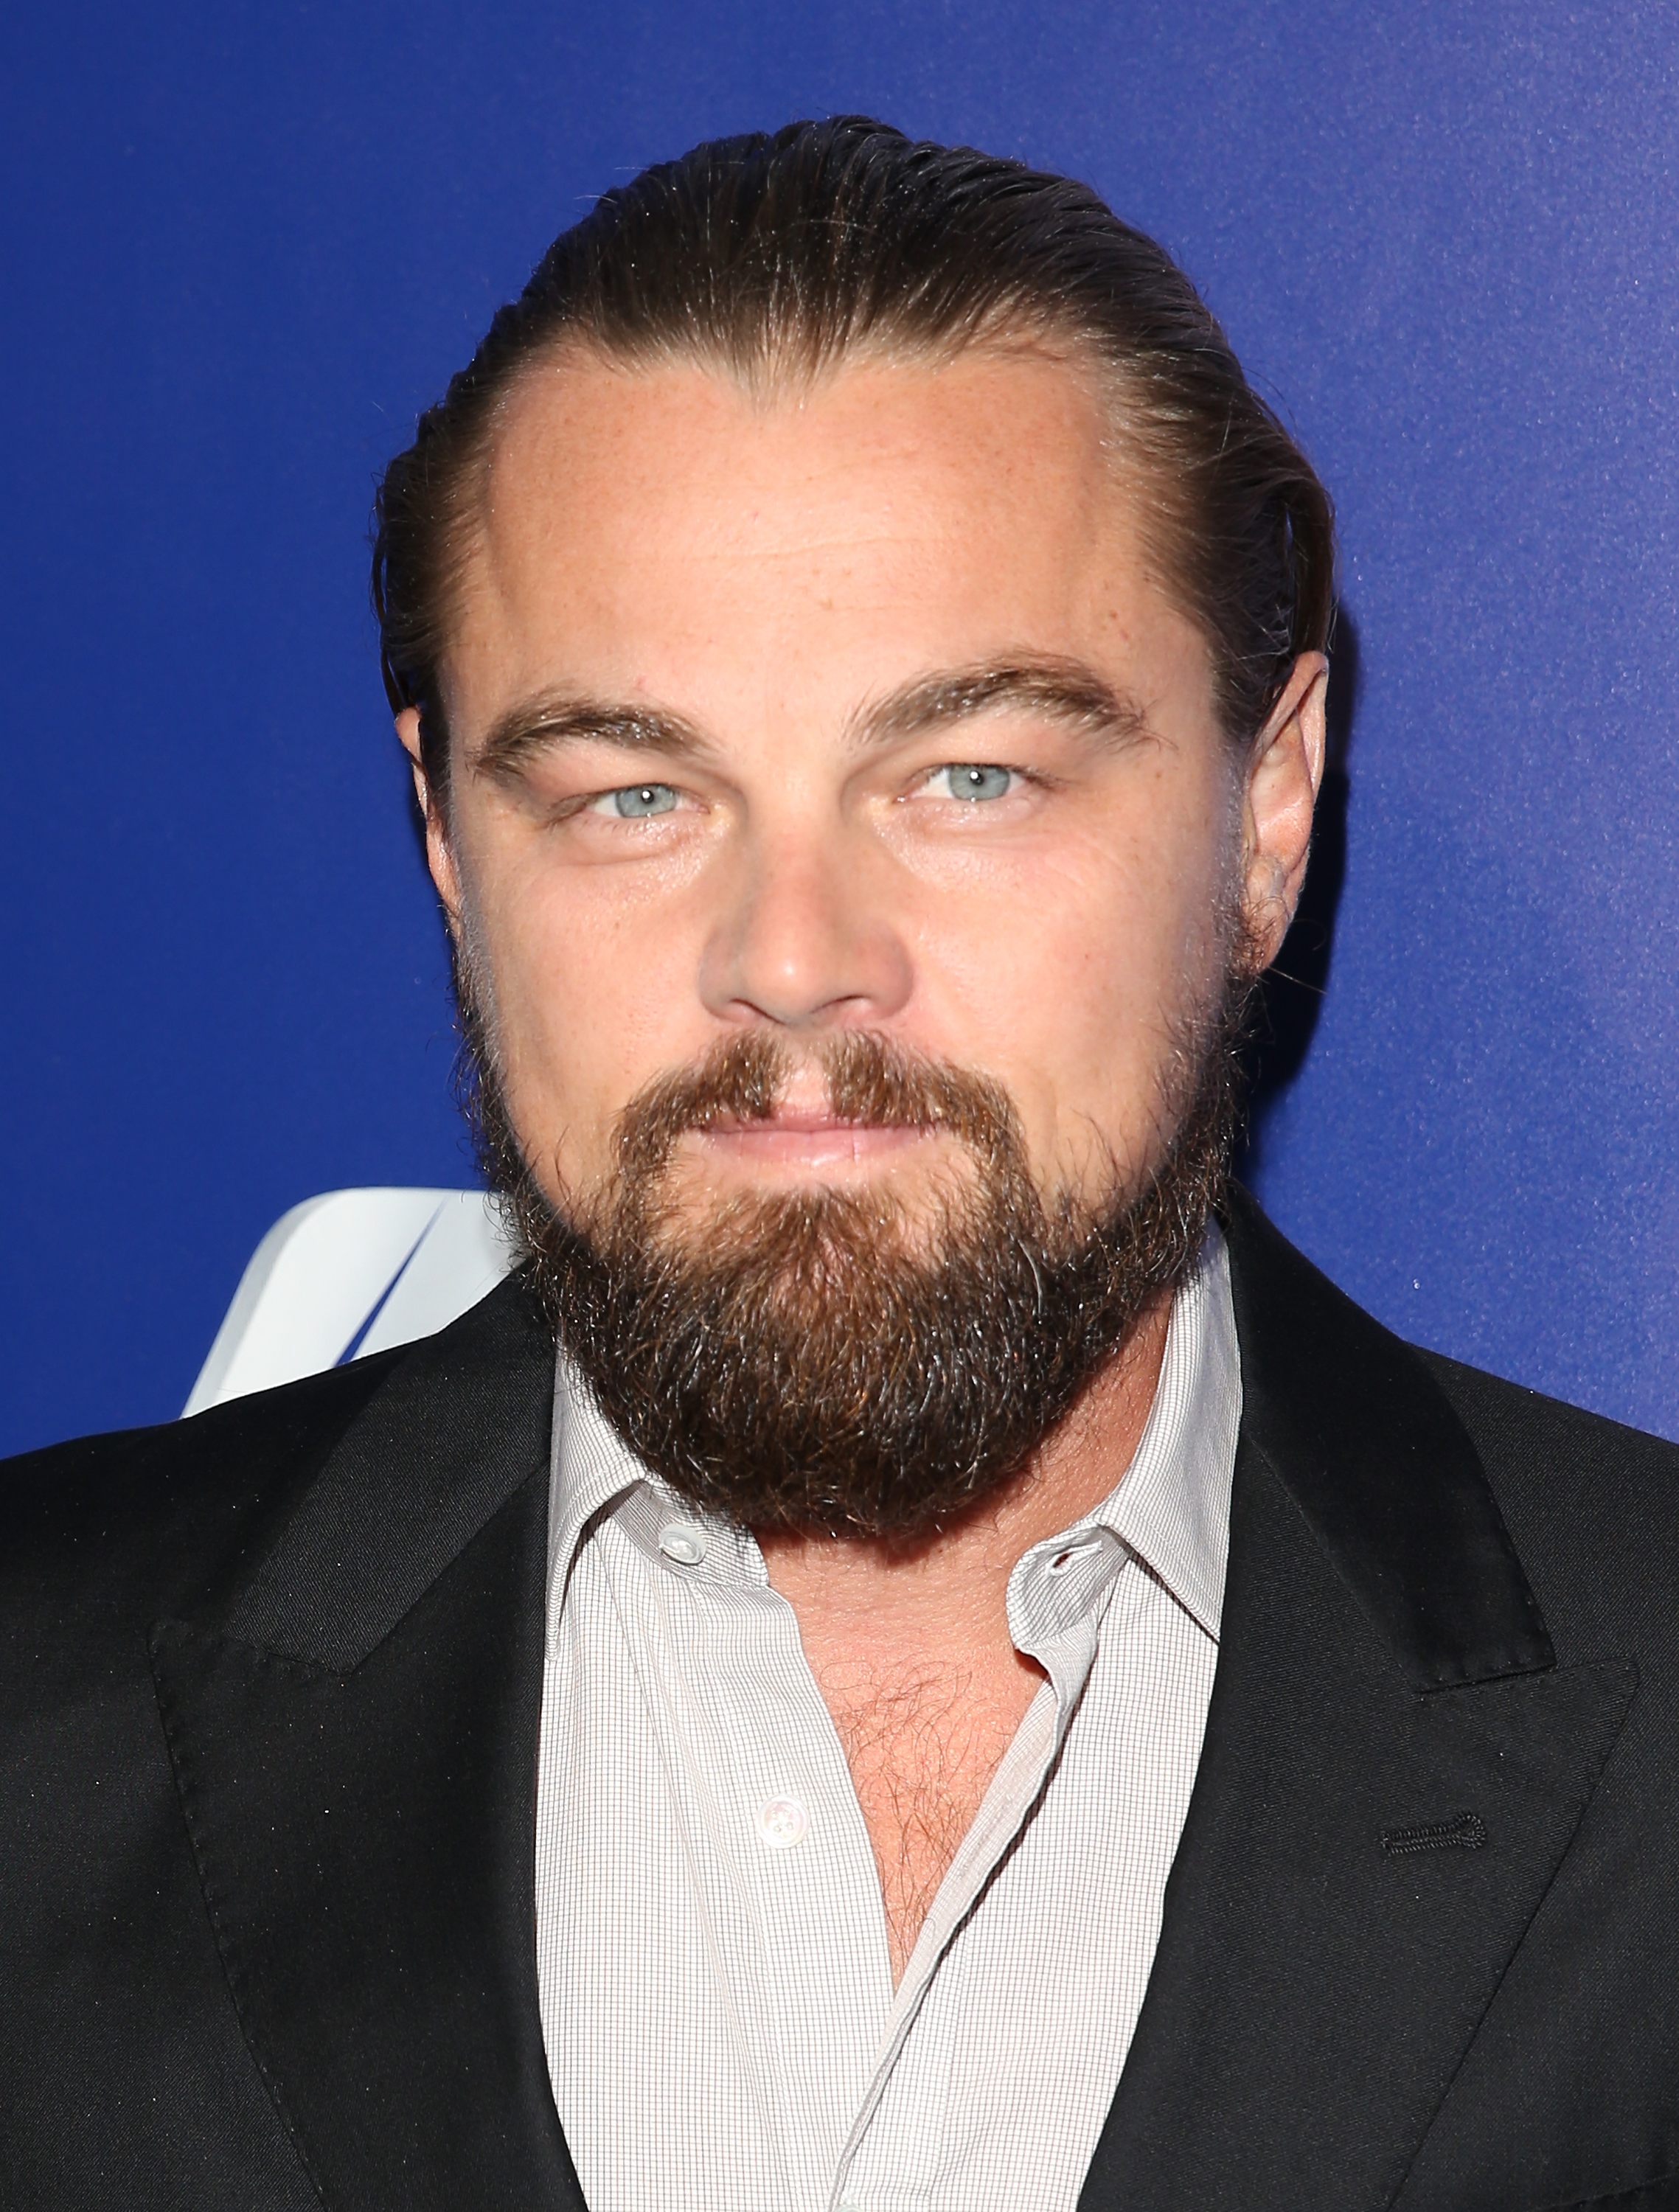 Leonardo DiCaprio attends the 7th Annual Oceana's Annual SeaChange Summer party on August 16, 2014 in Laguna Beach, California. | Source: Getty Images